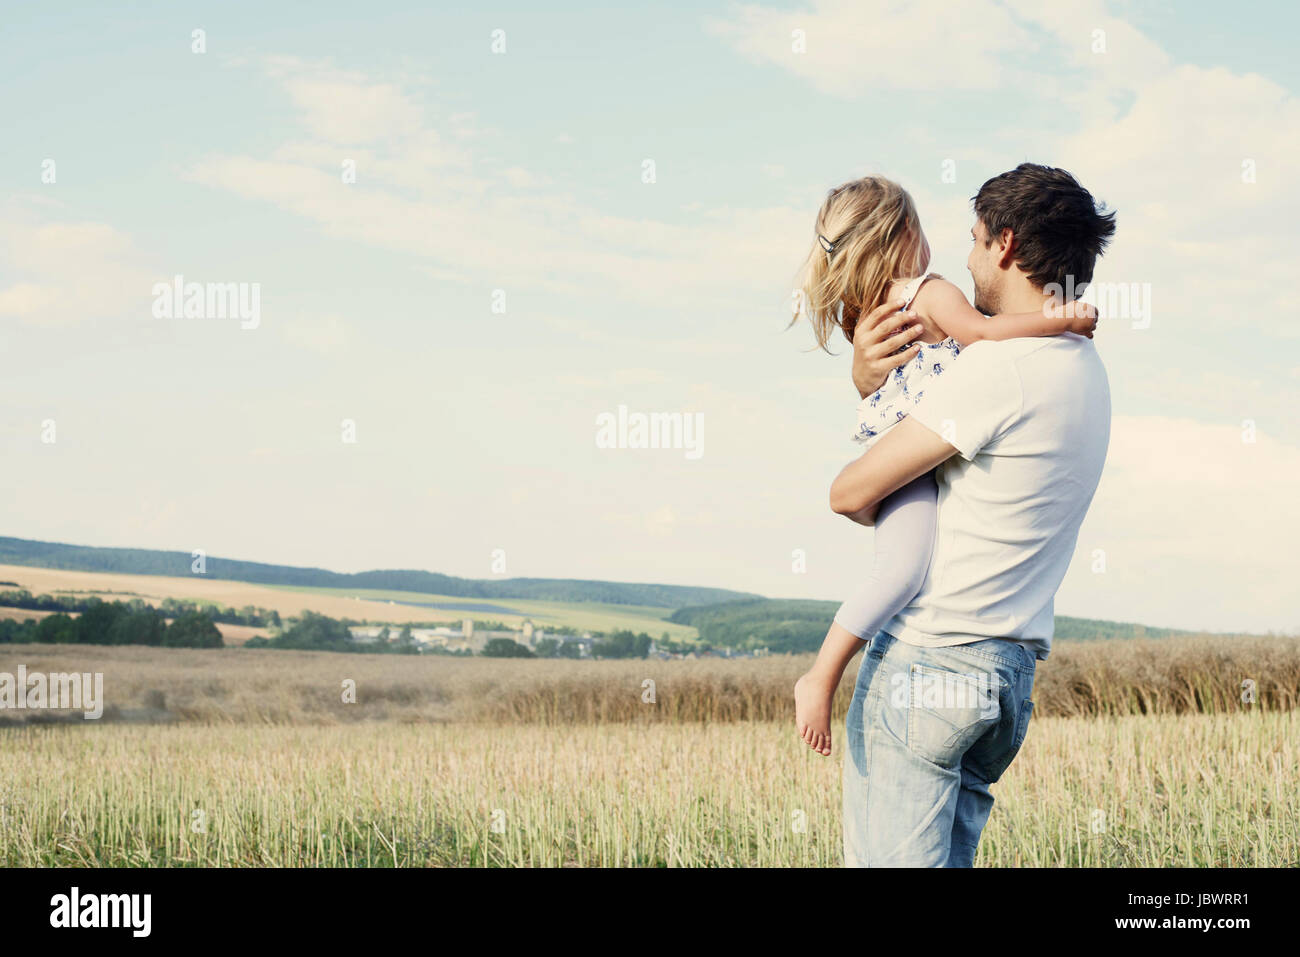 Mature man carrying toddler daughter looking out from wheat field Stock Photo